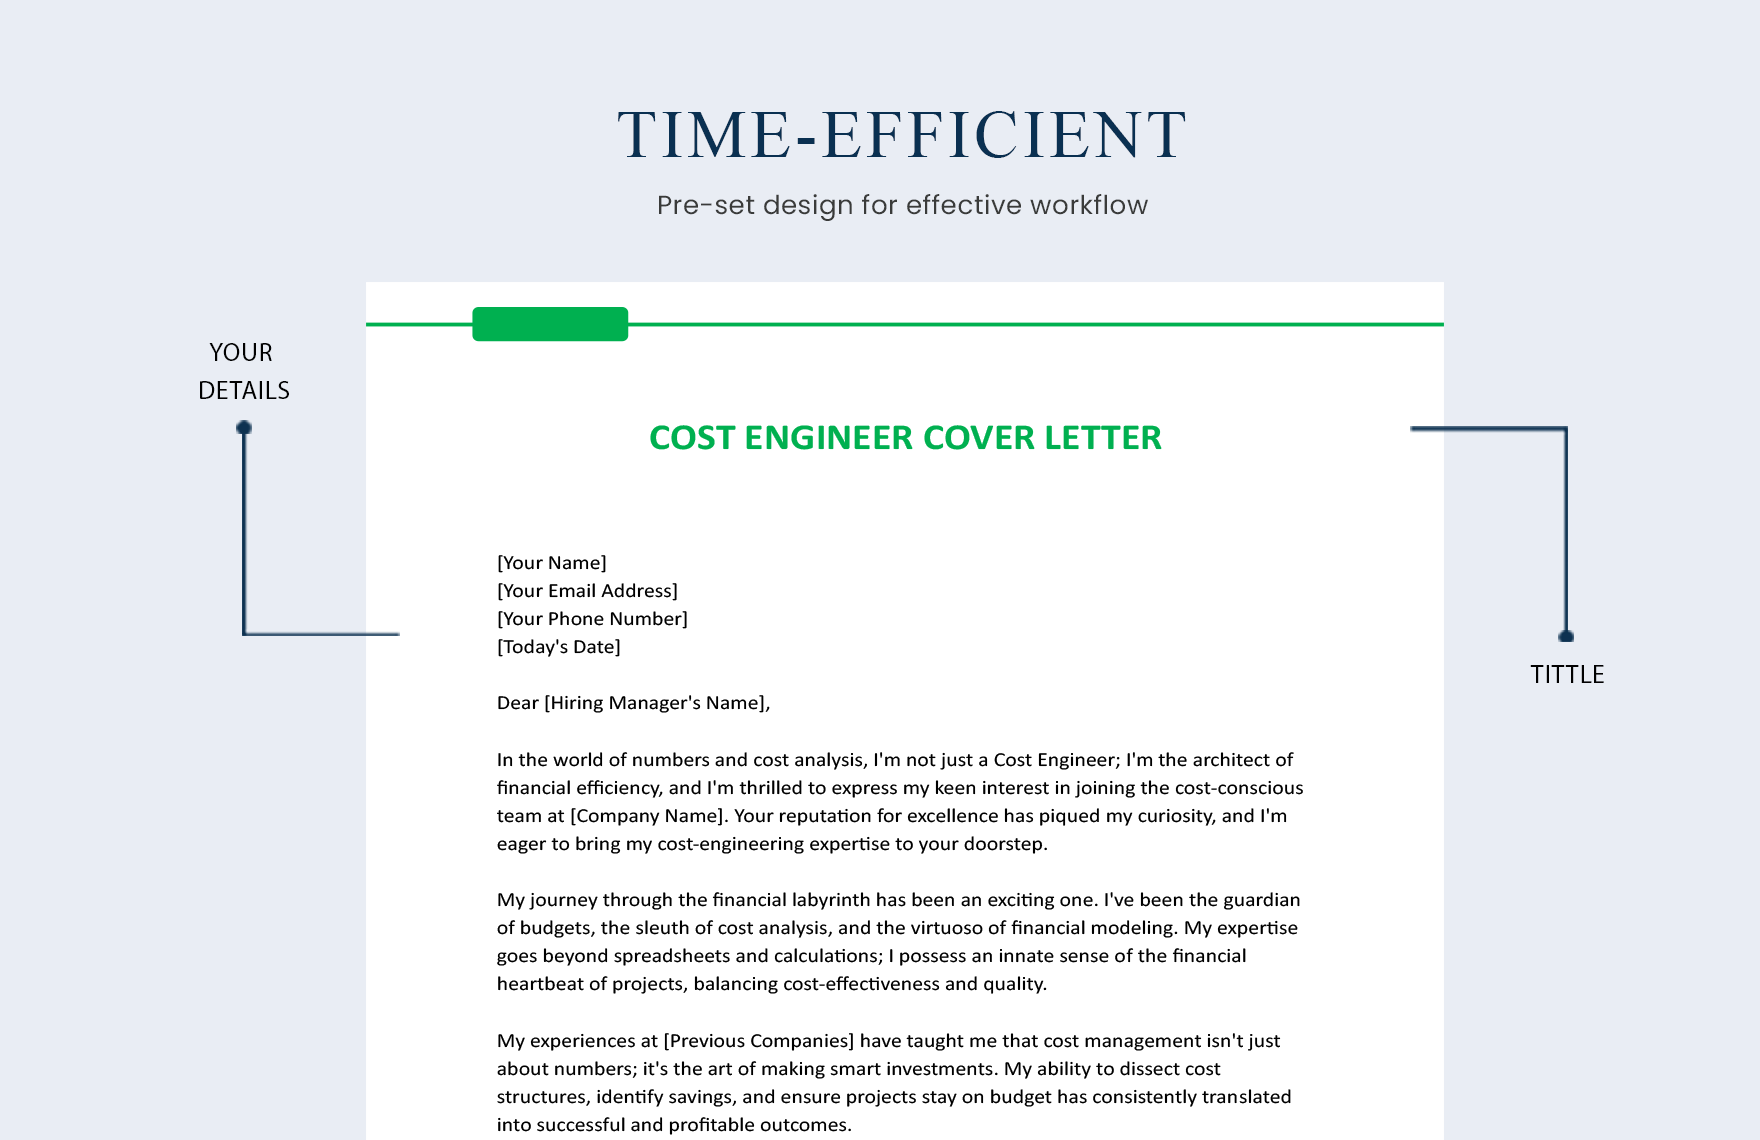 Cost Engineer Cover Letter